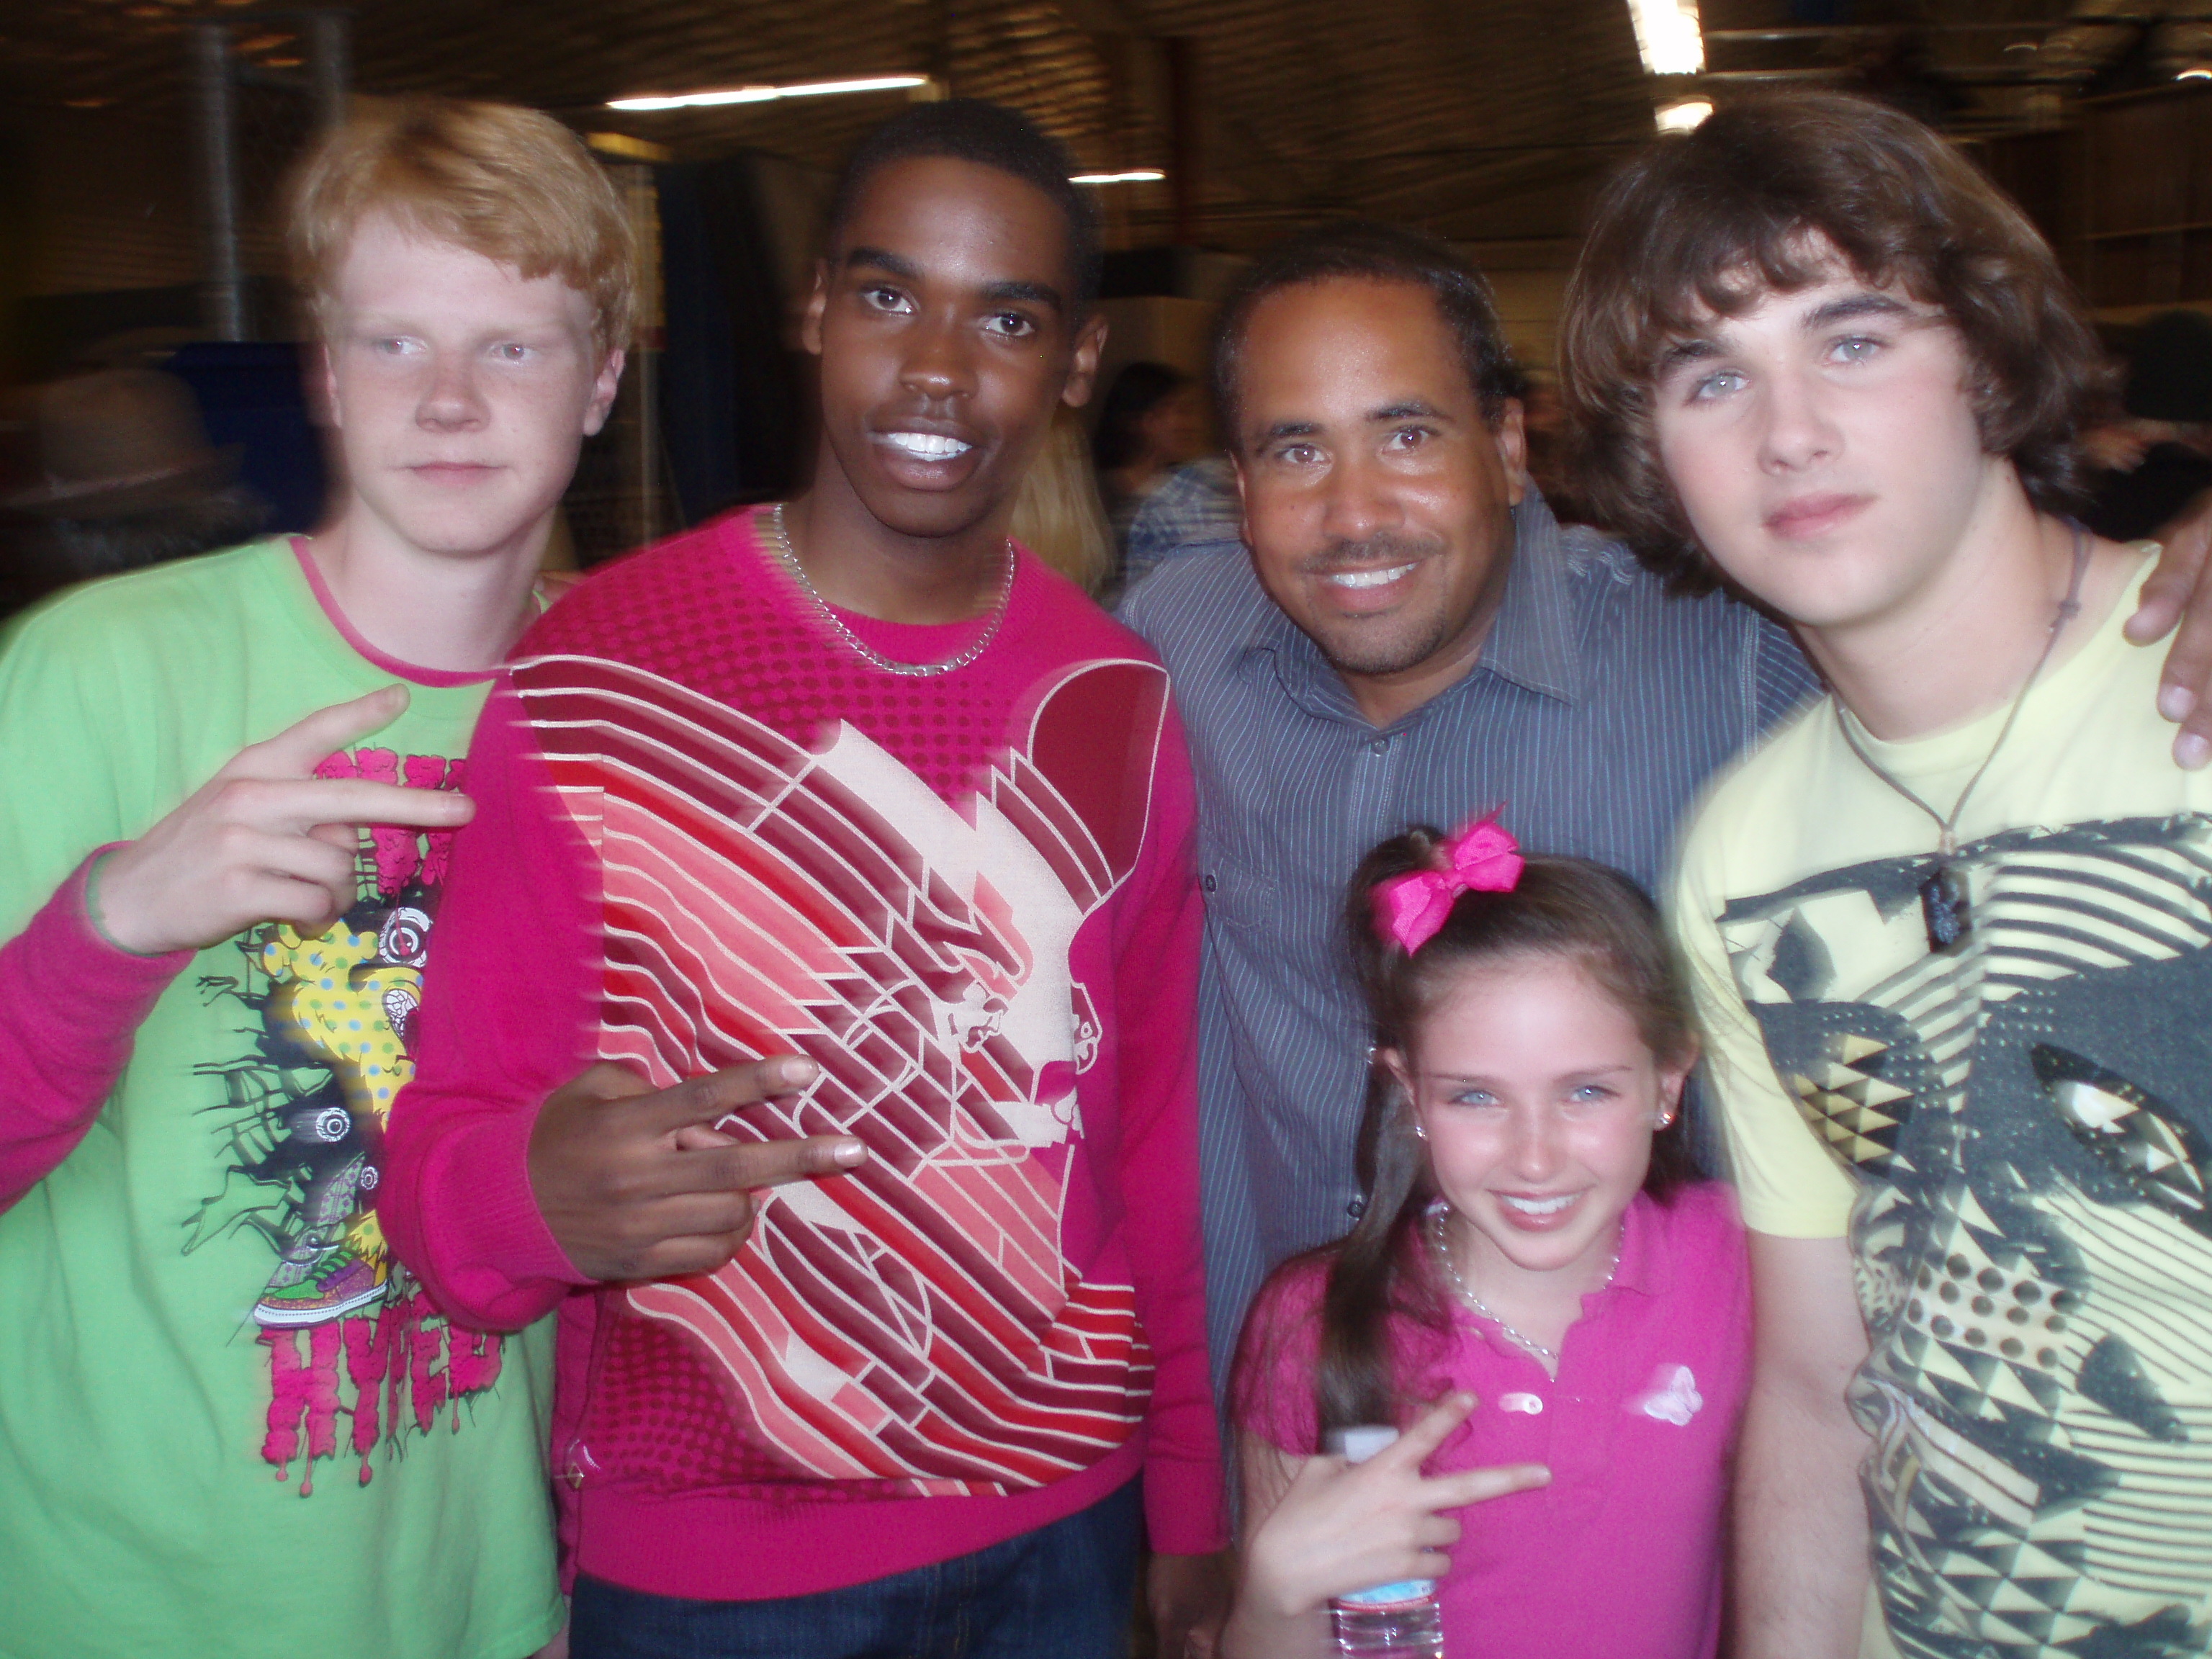 On Set of Zeke & Luther